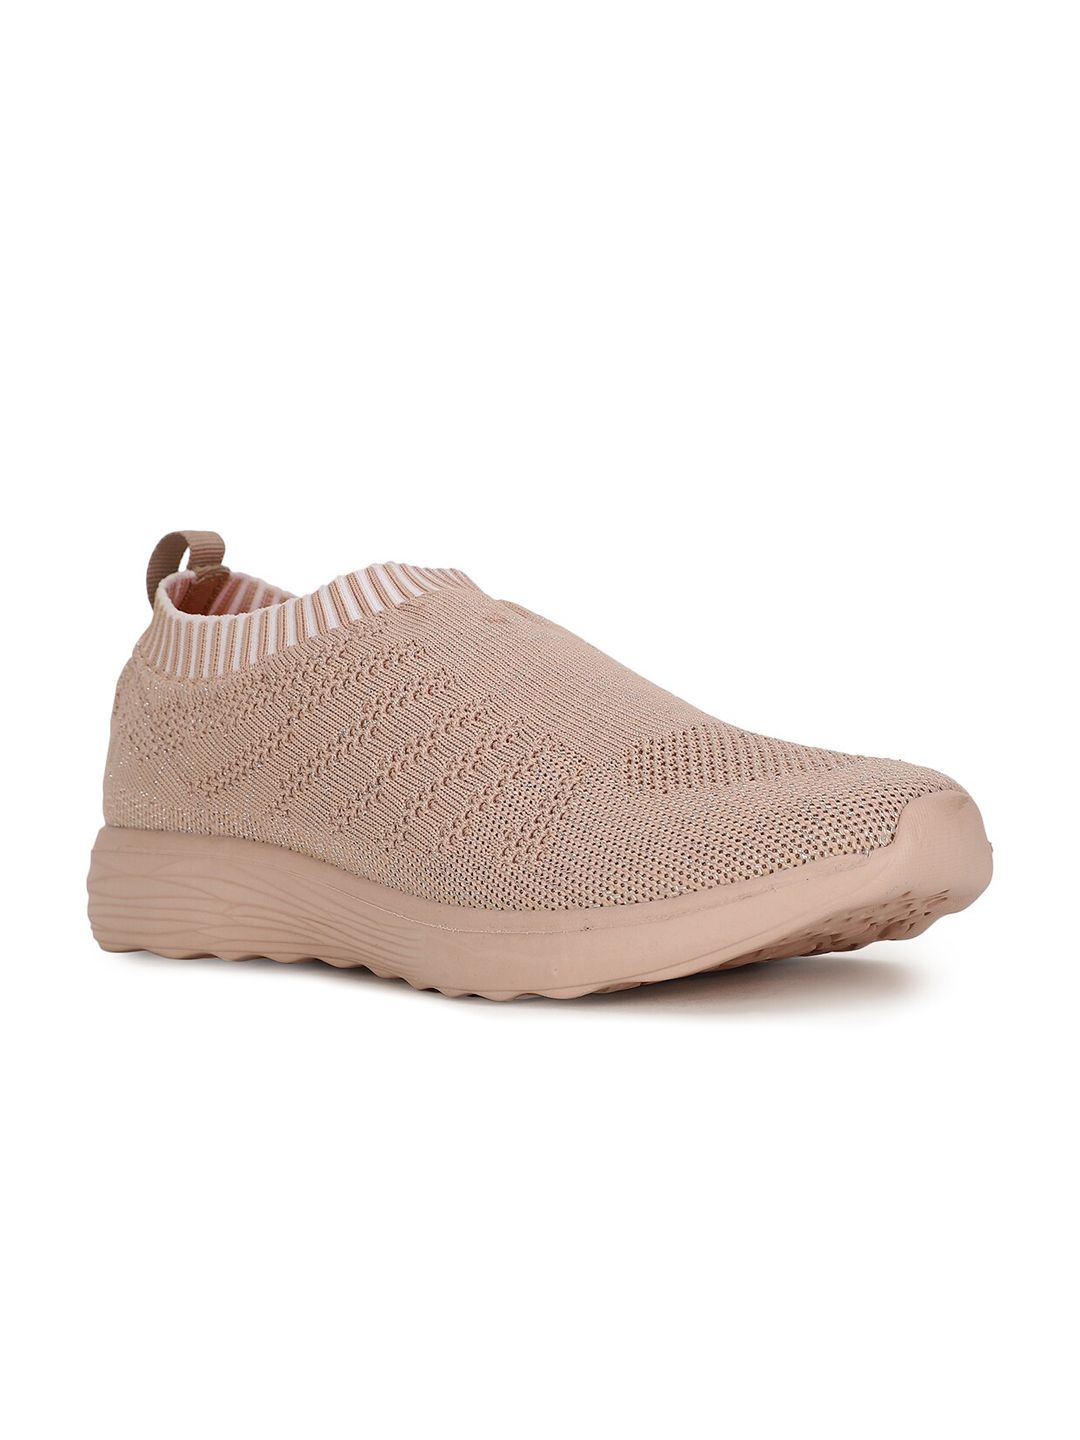 North Star Women Pink Woven Design Slip-On Sneakers Price in India